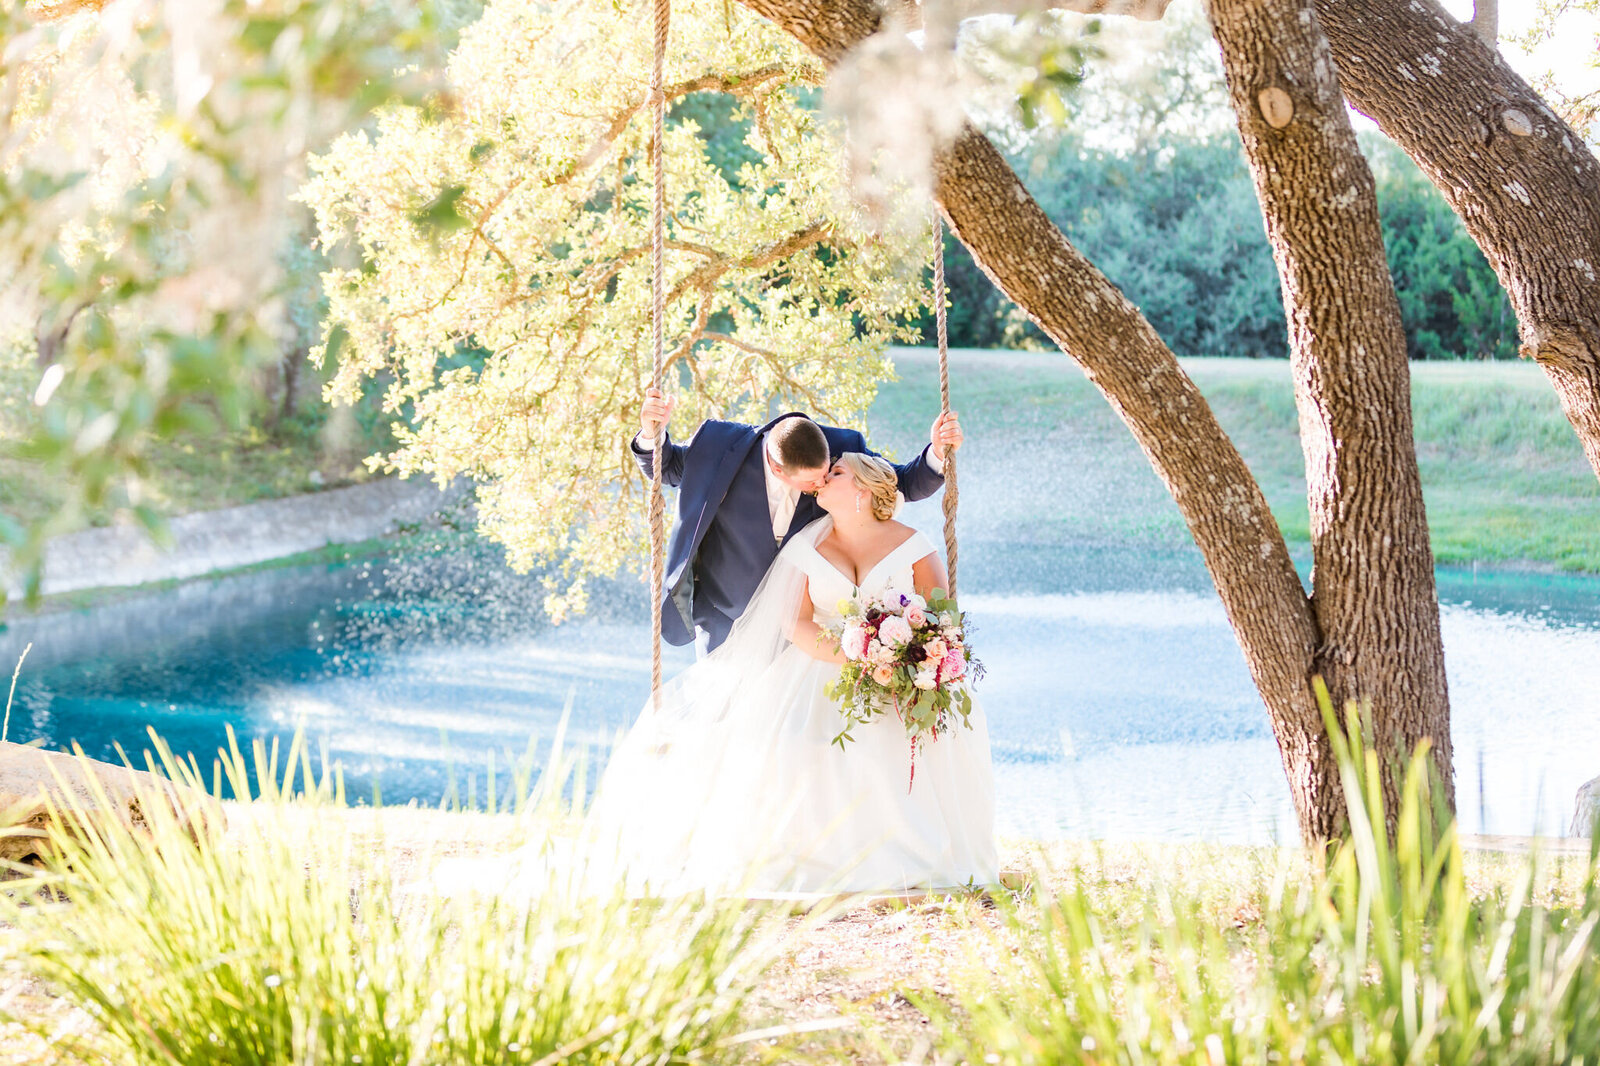 A bride and groom kiss on the tree swing.